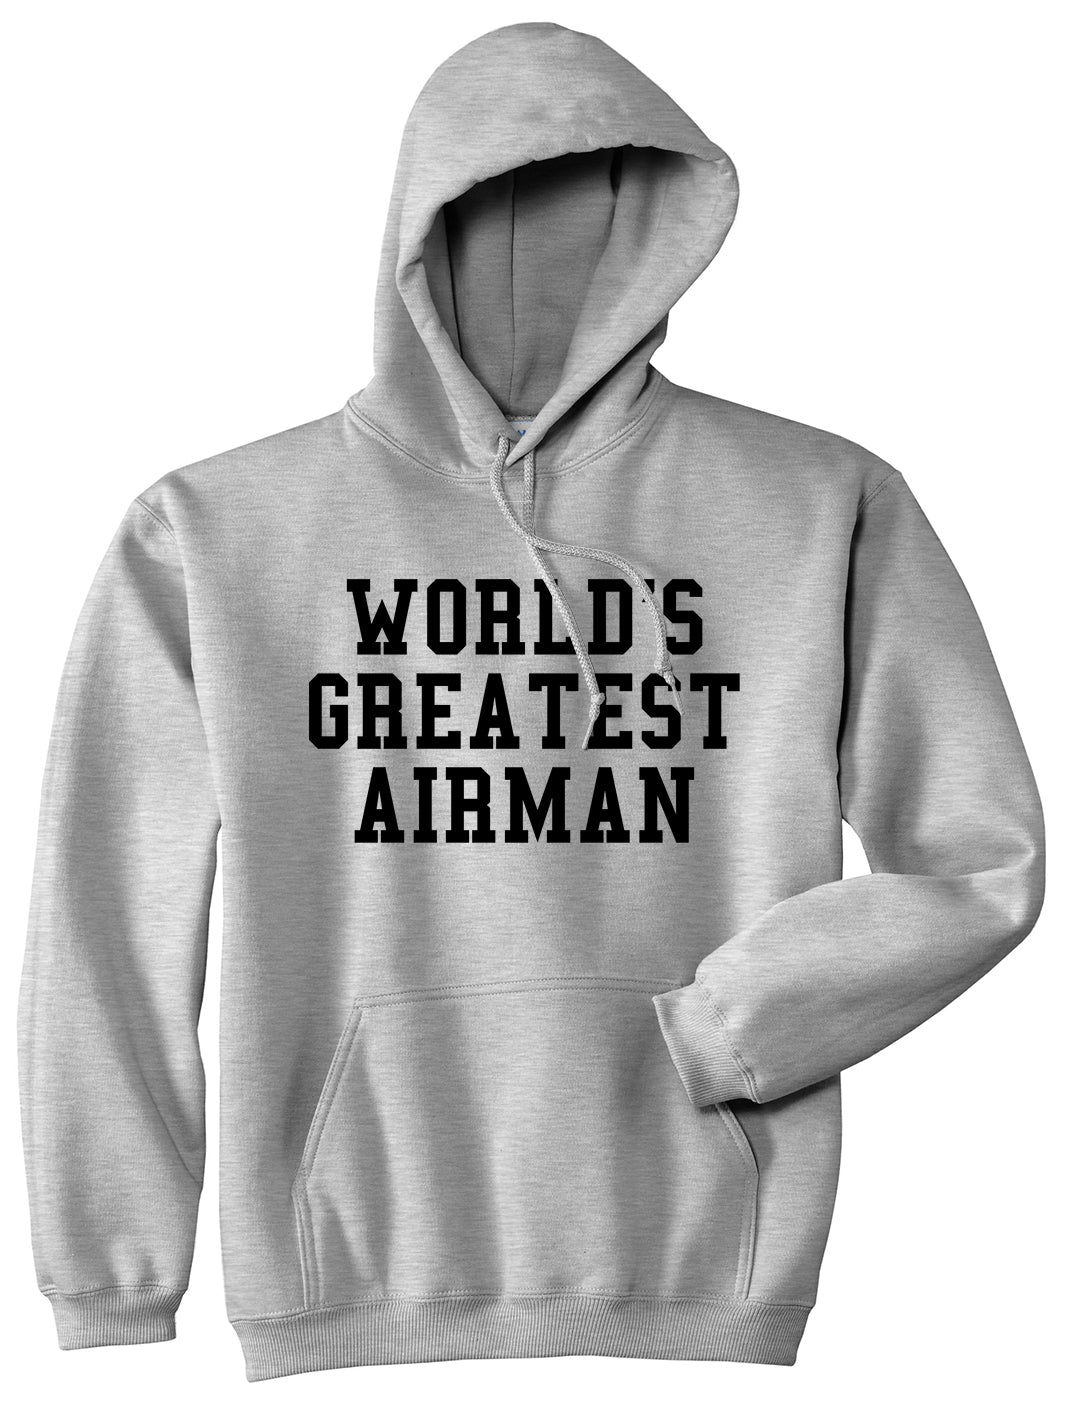 Worlds Greatest Airman Pilot Mens Pullover Hoodie Grey